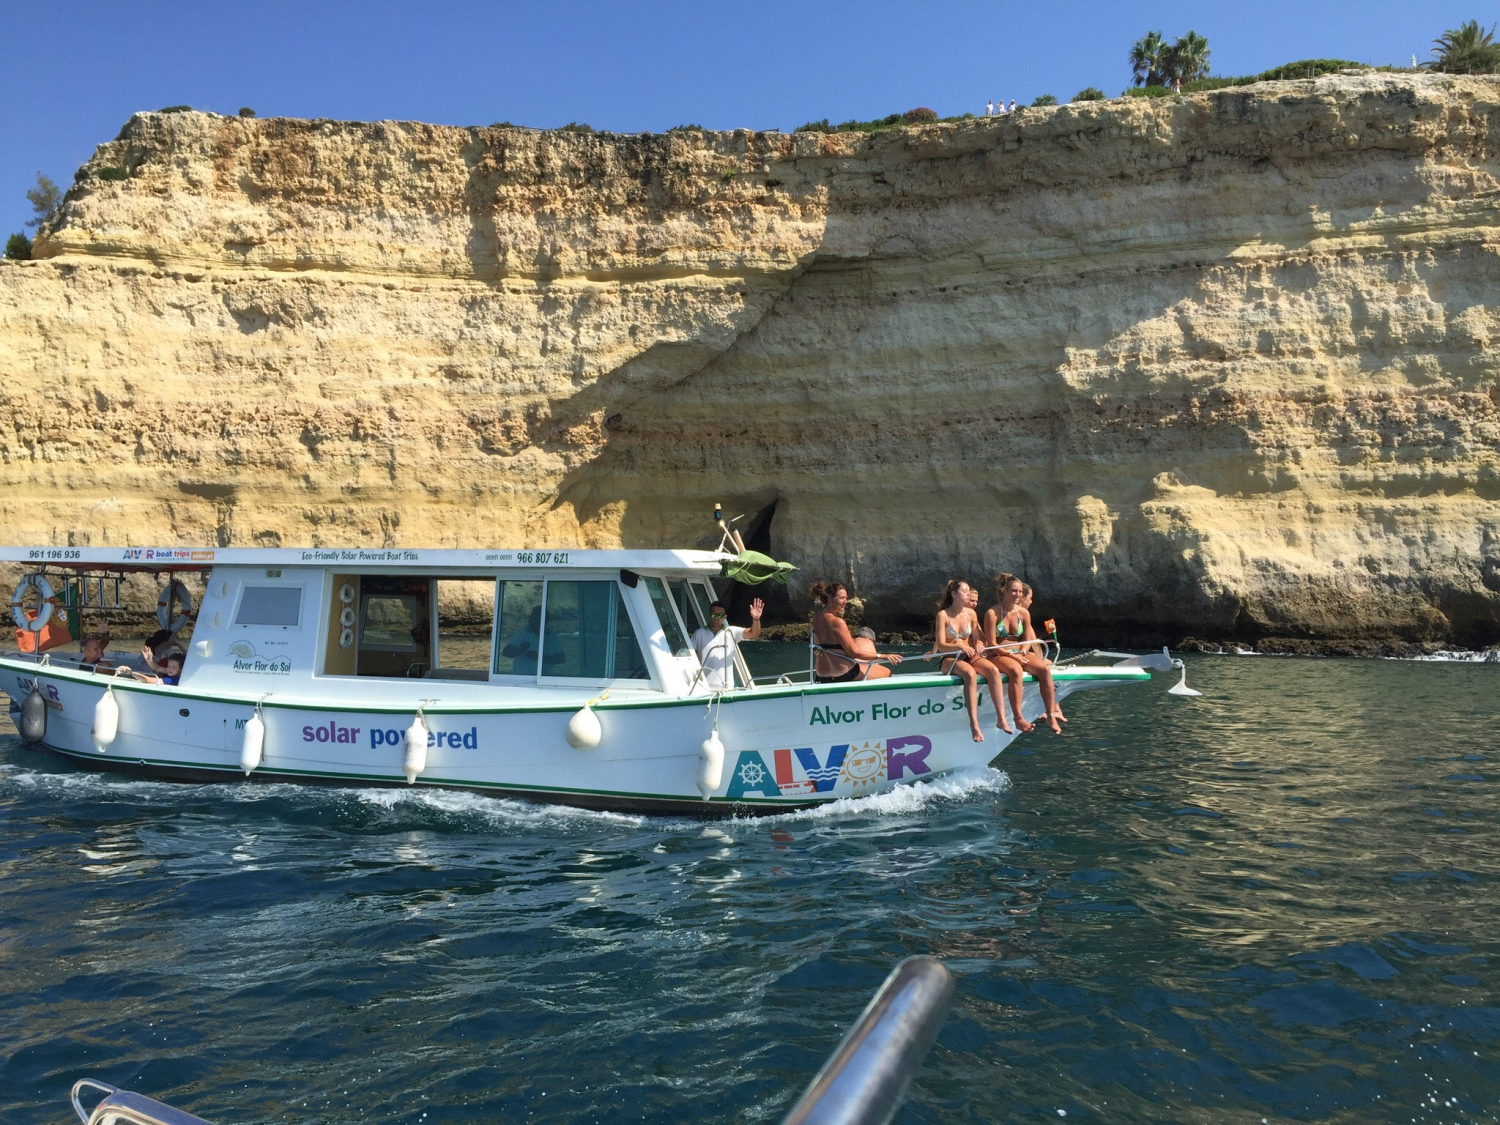 Top 5 Things Your Kids will Love in Algarve